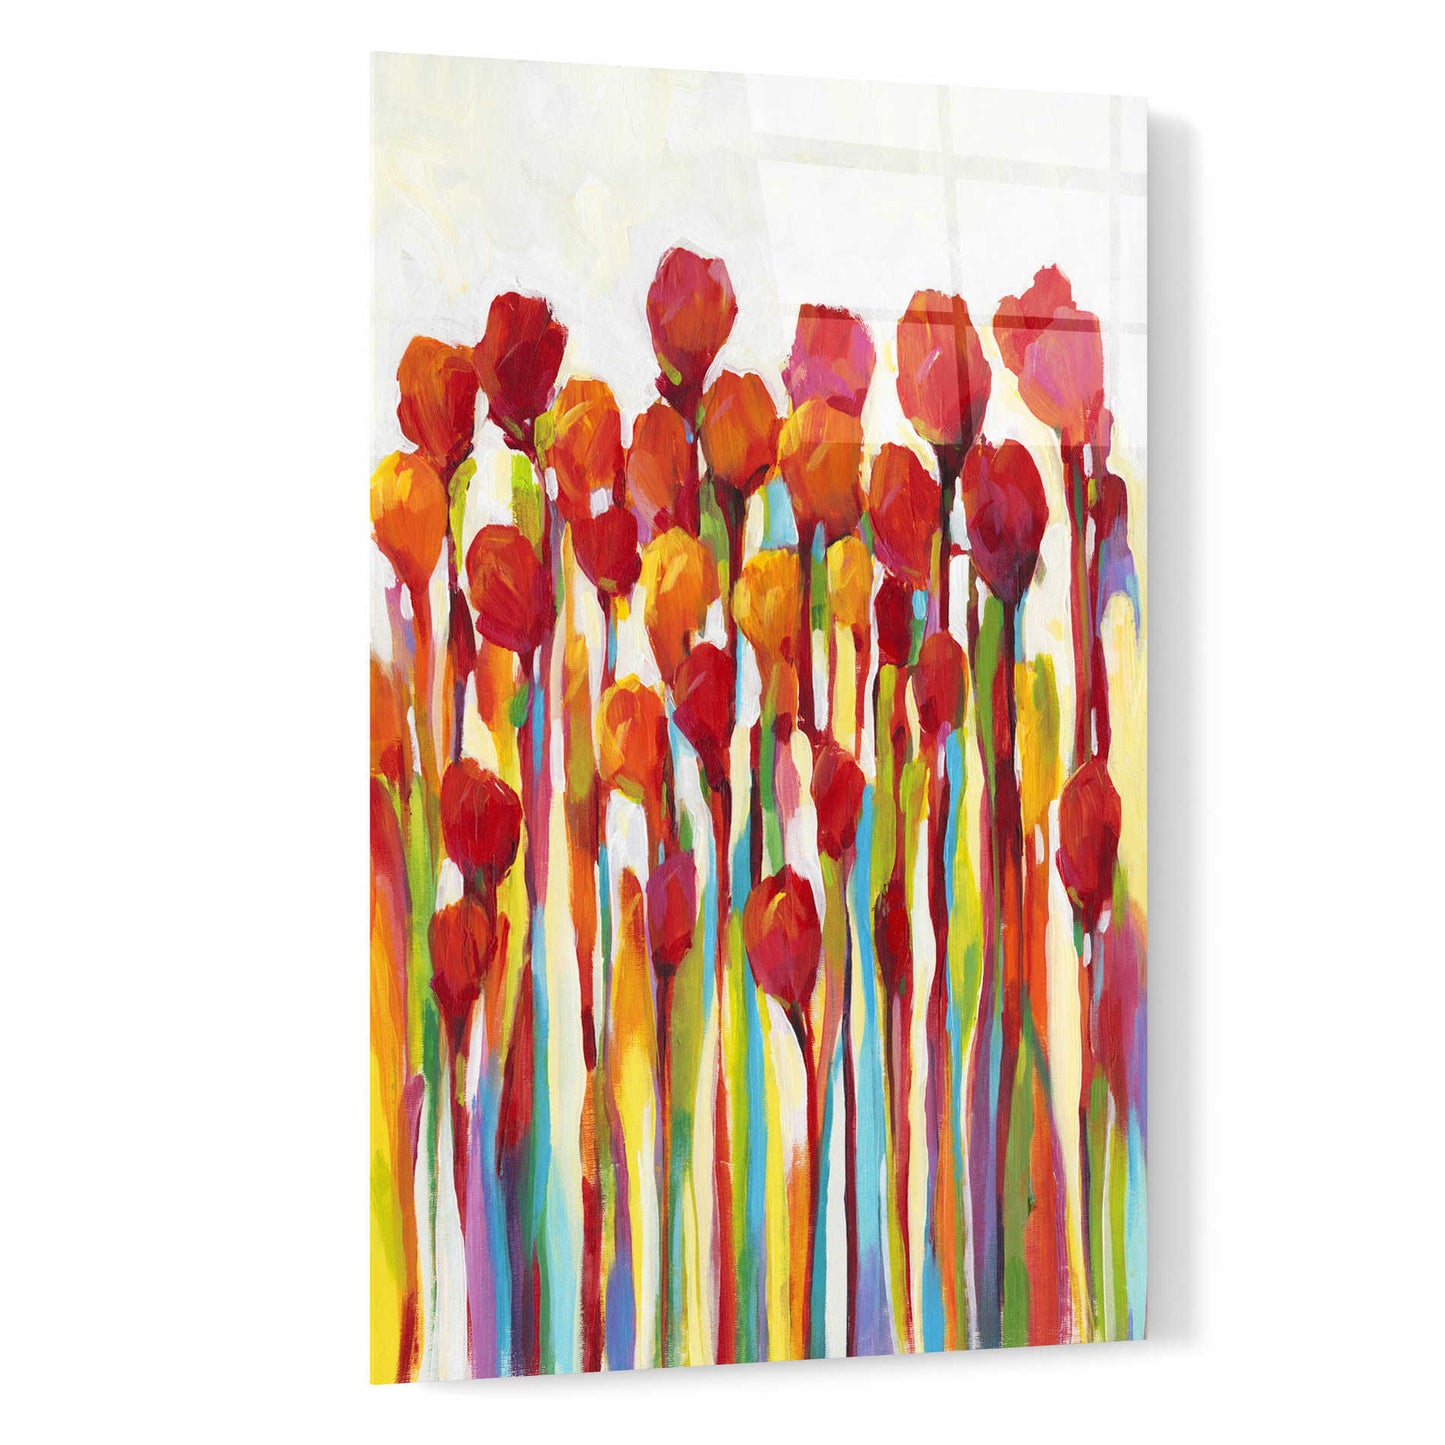 Epic Art 'Bursting with Color I' by Tim O'Toole, Acrylic Glass Wall Art,16x24